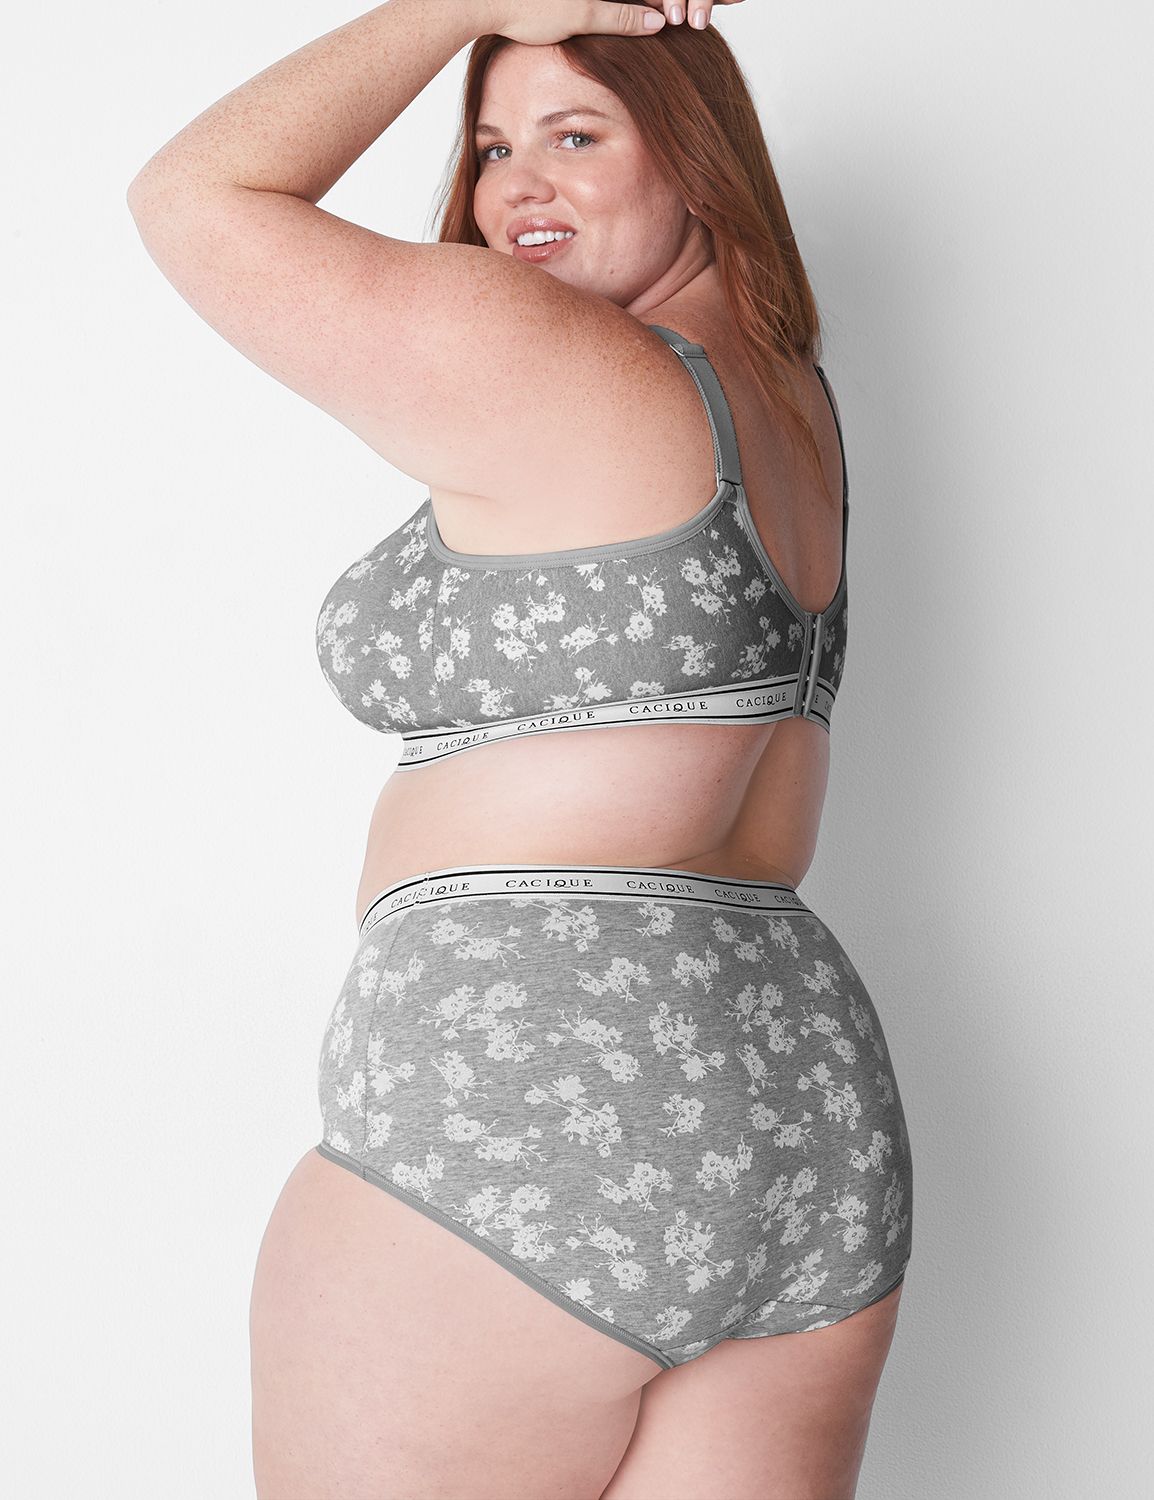 New Lane Bryant Cacique 48DDD Mint Green/Blue Unlined Full